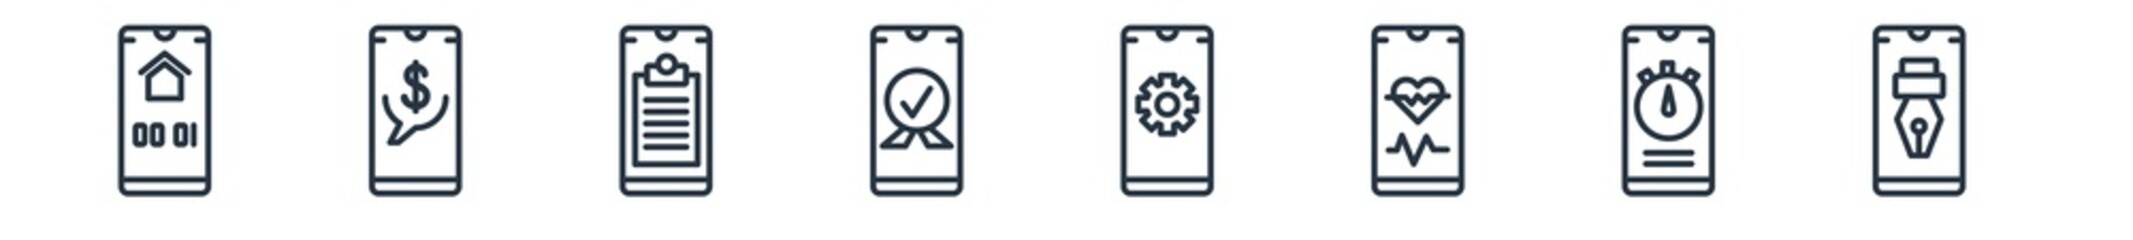 linear set of mobile app outline icons. line vector icons such as homepage, mobile banking, description, accepted, applications, edit tool vector illustration.